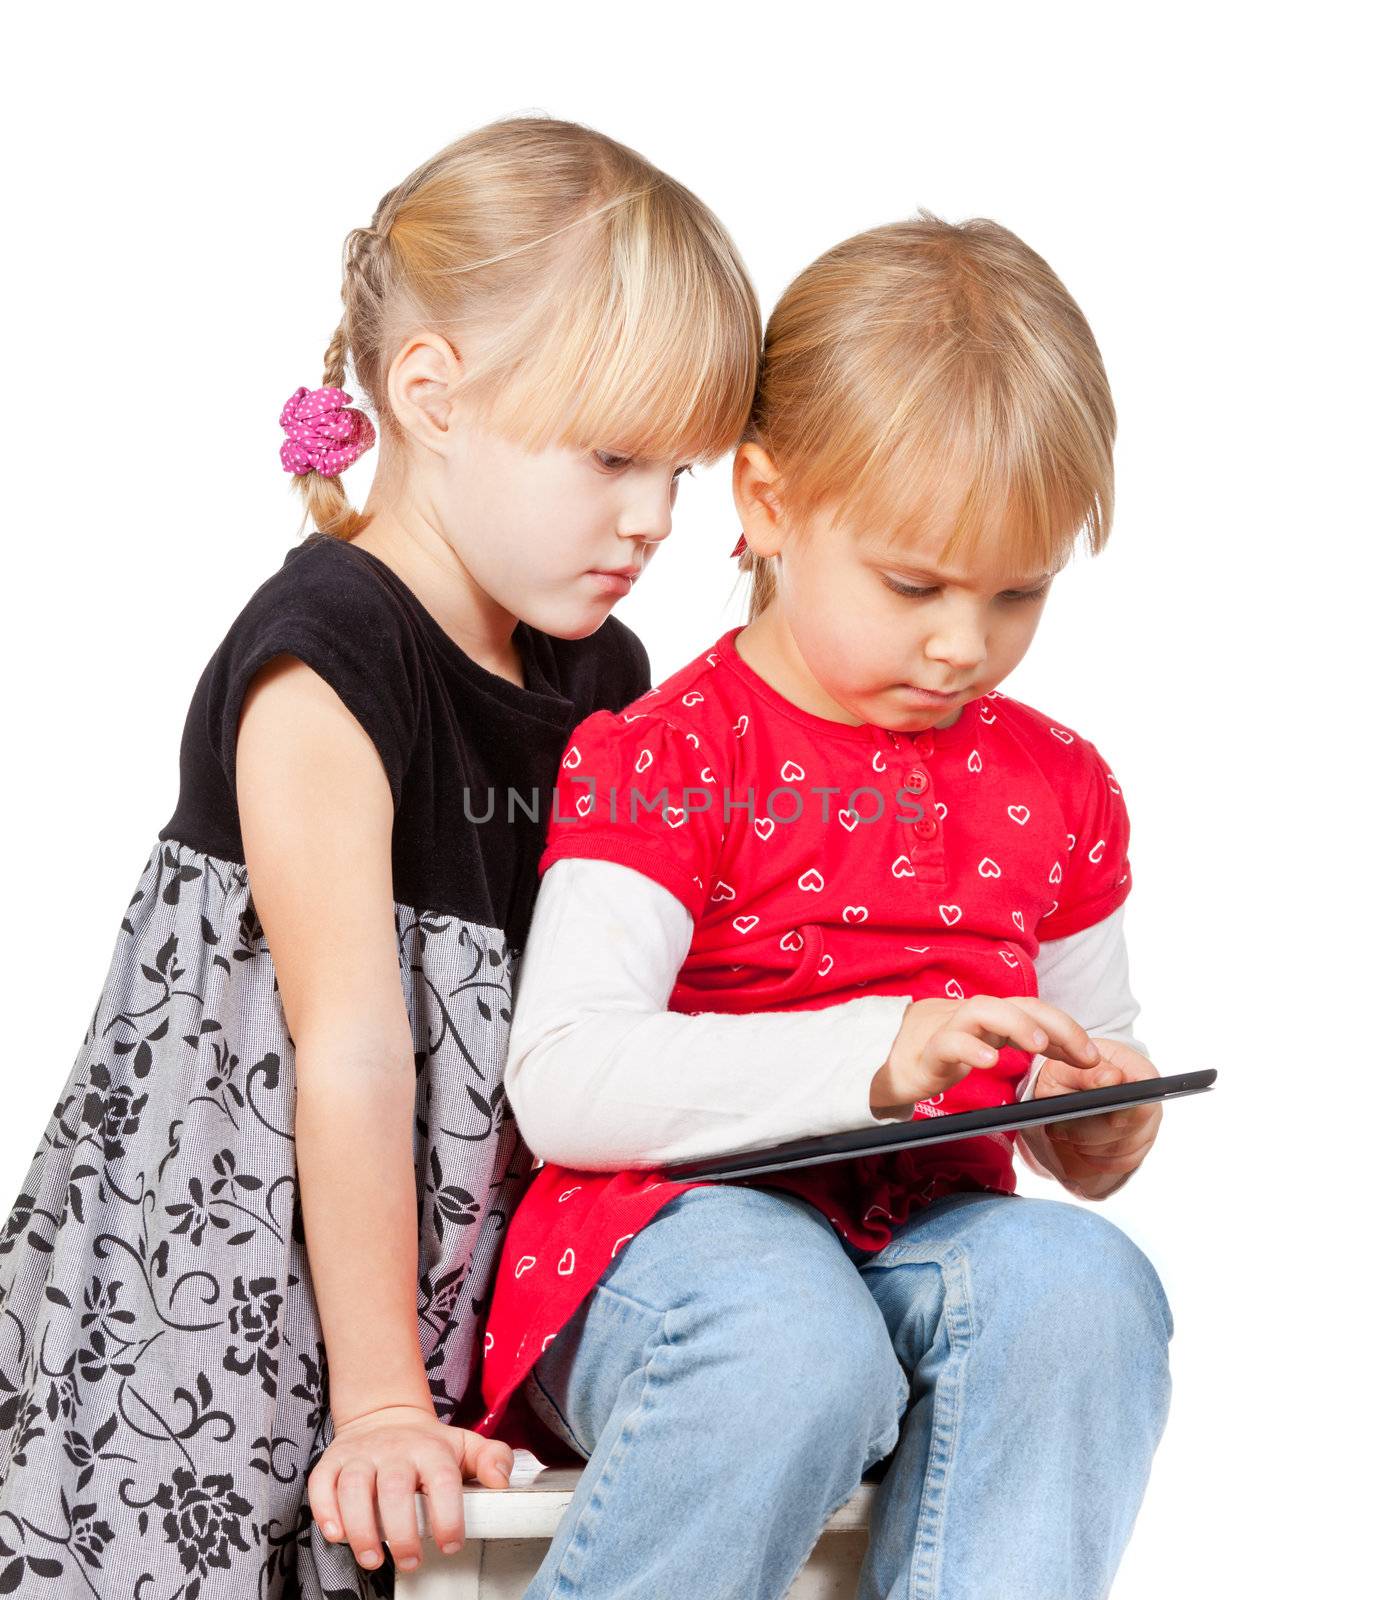 Two serious girls playing with a touch pad